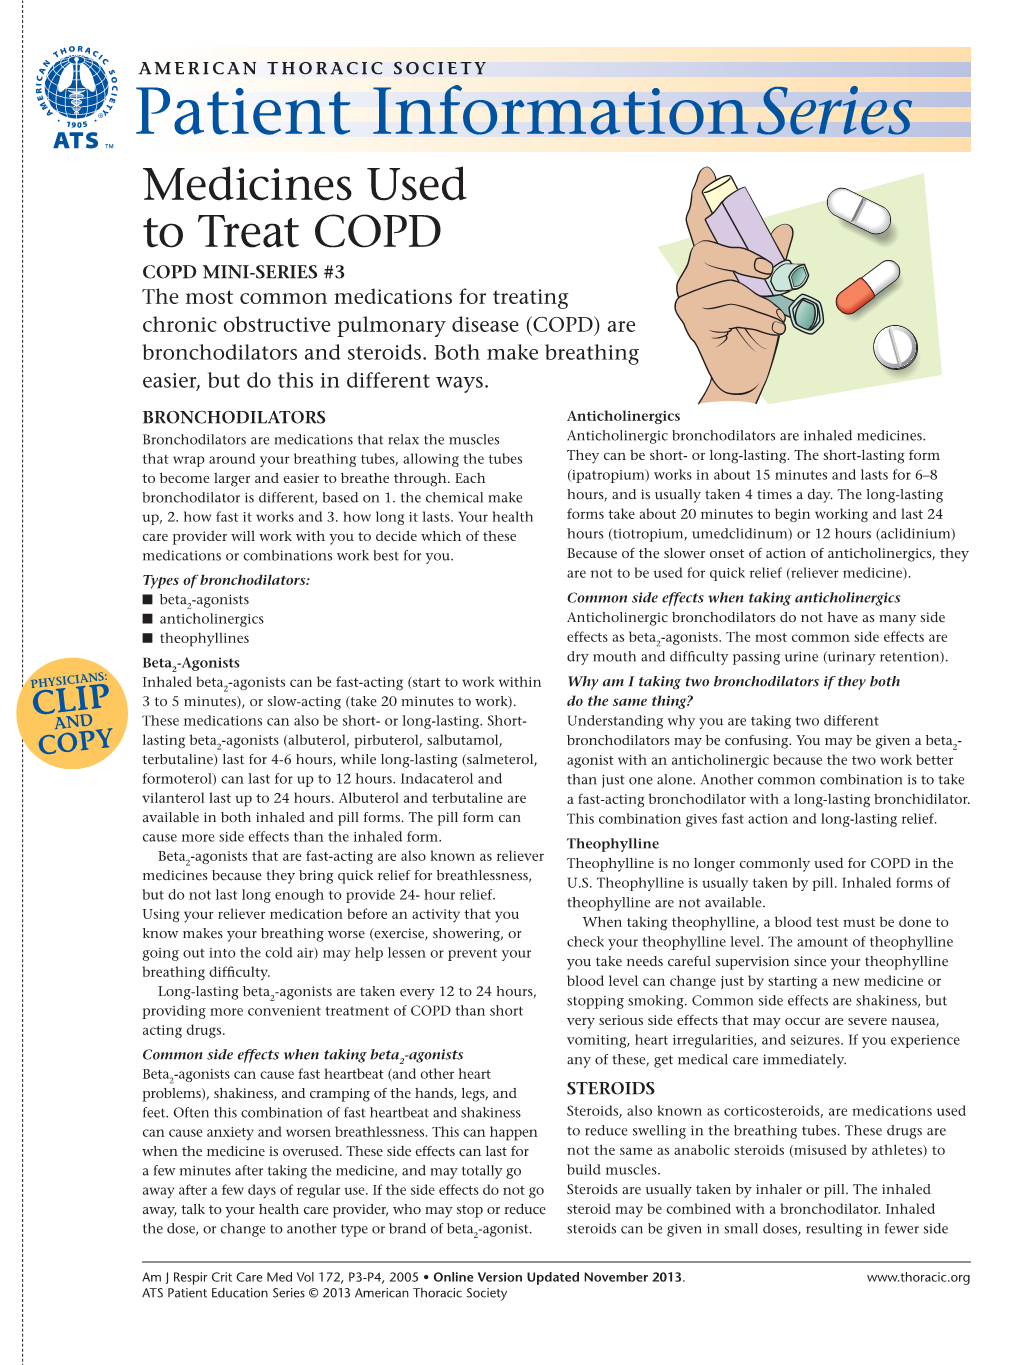 Medications Used to Treat COPD